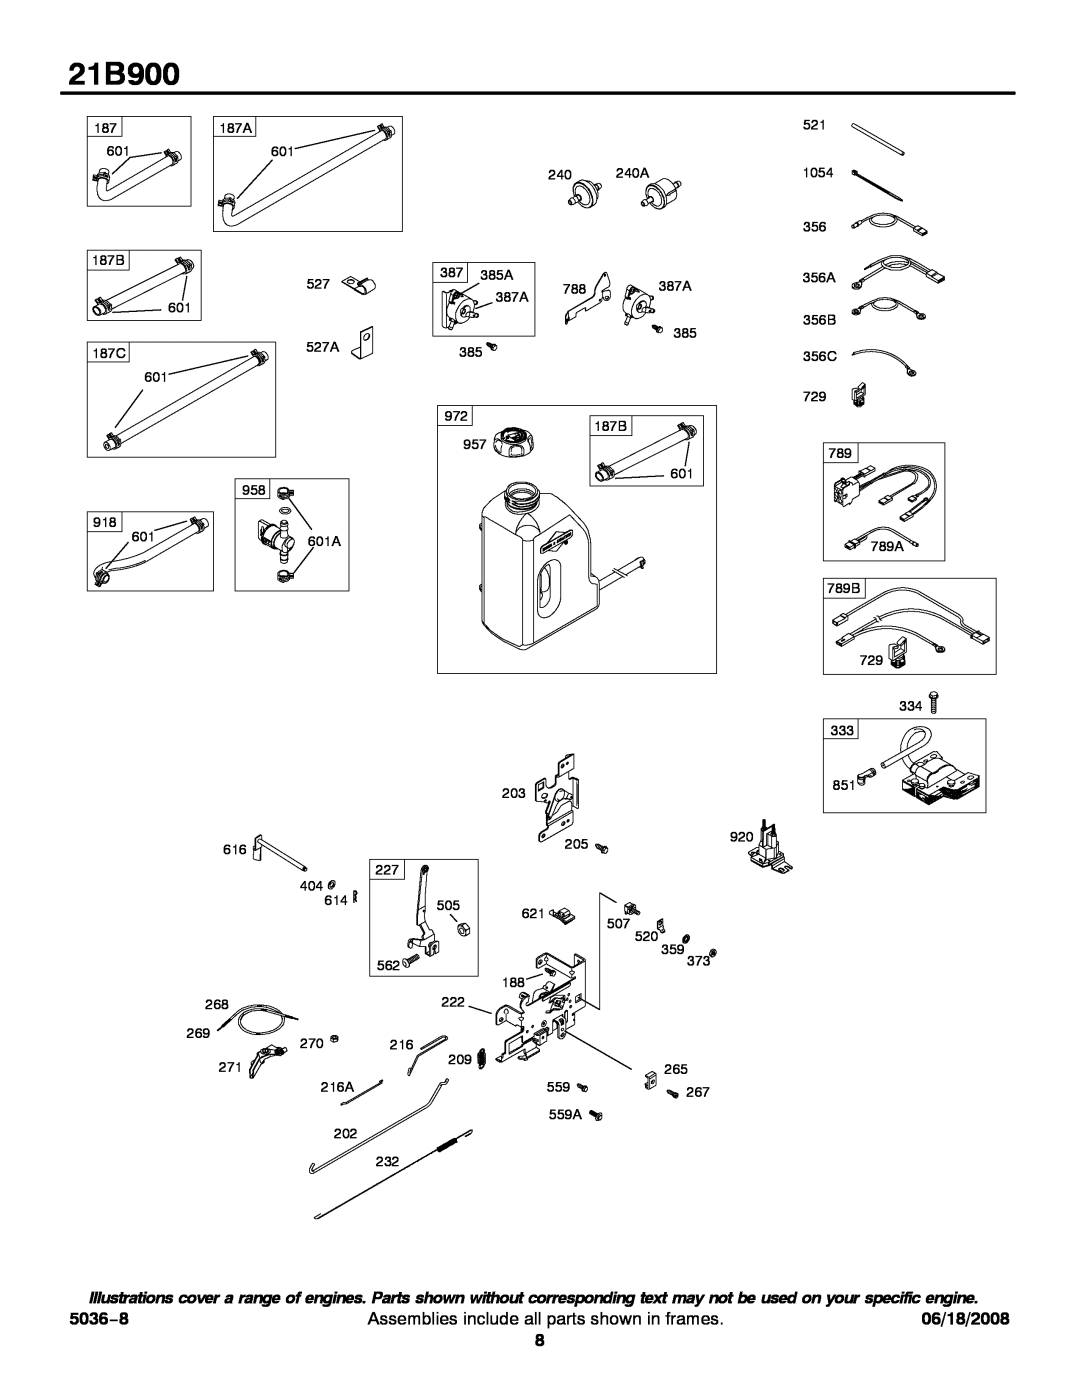 Briggs & Stratton 21B900 service manual 5036−8, Assemblies include all parts shown in frames, 06/18/2008 